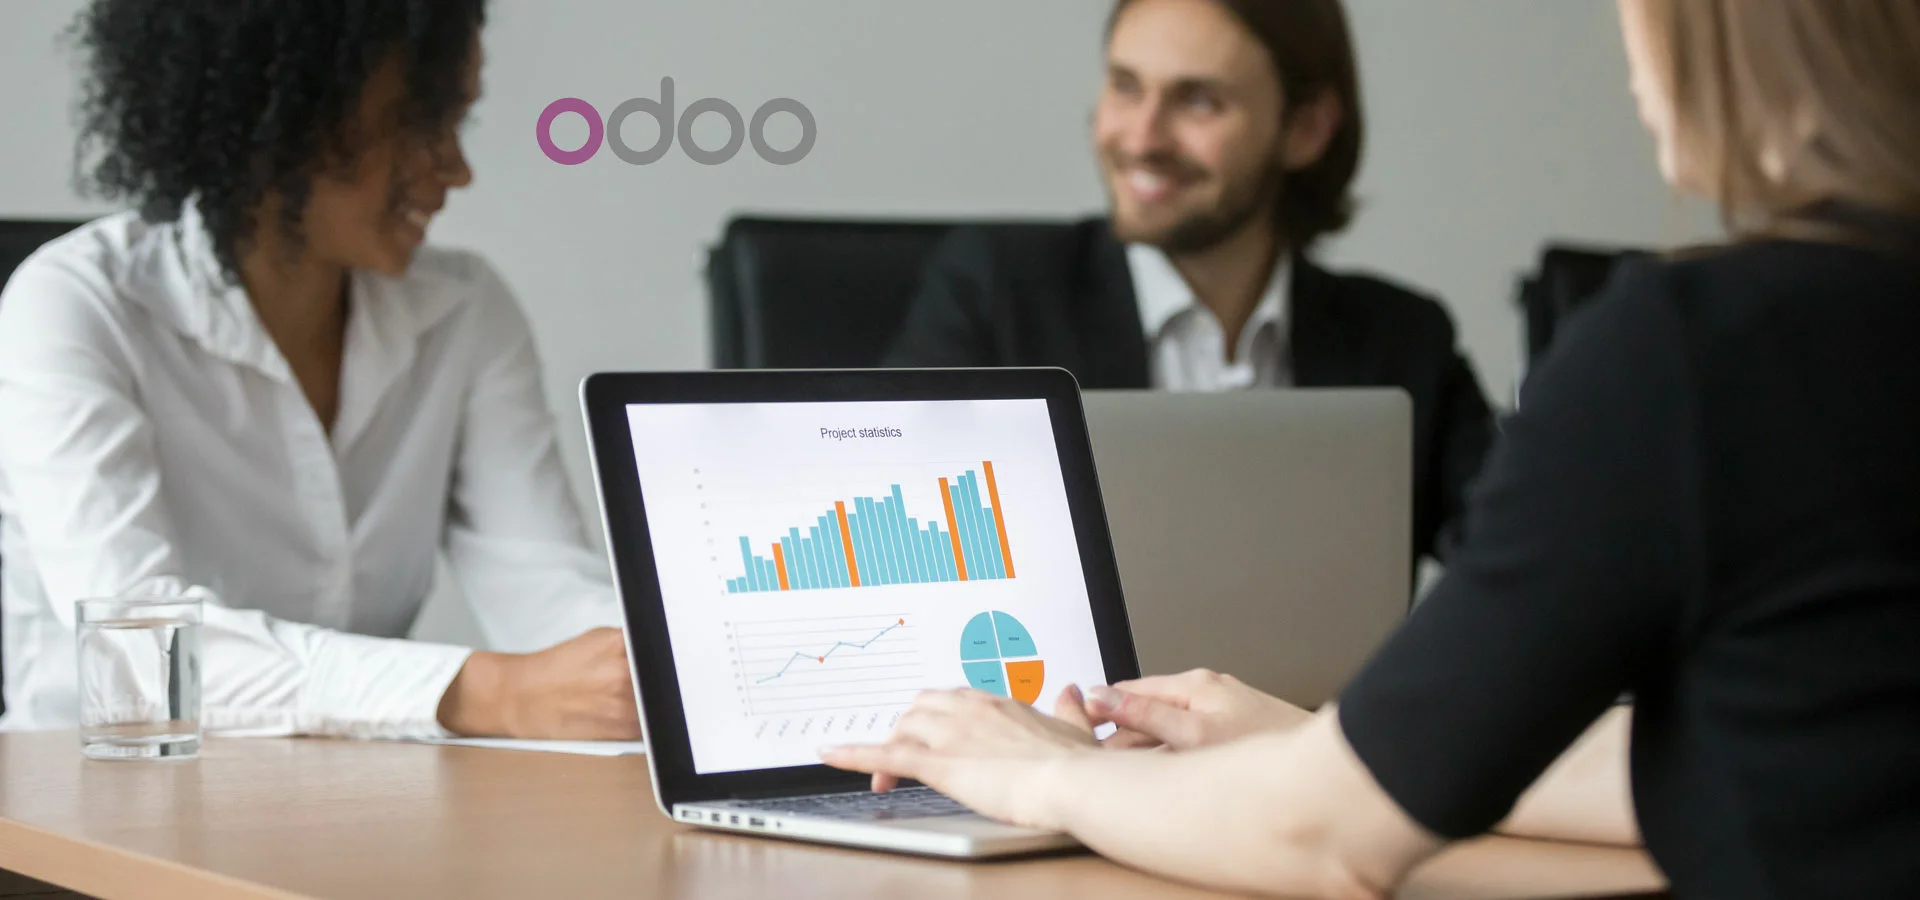 odoo-erp-support-and-services-related-blog-107